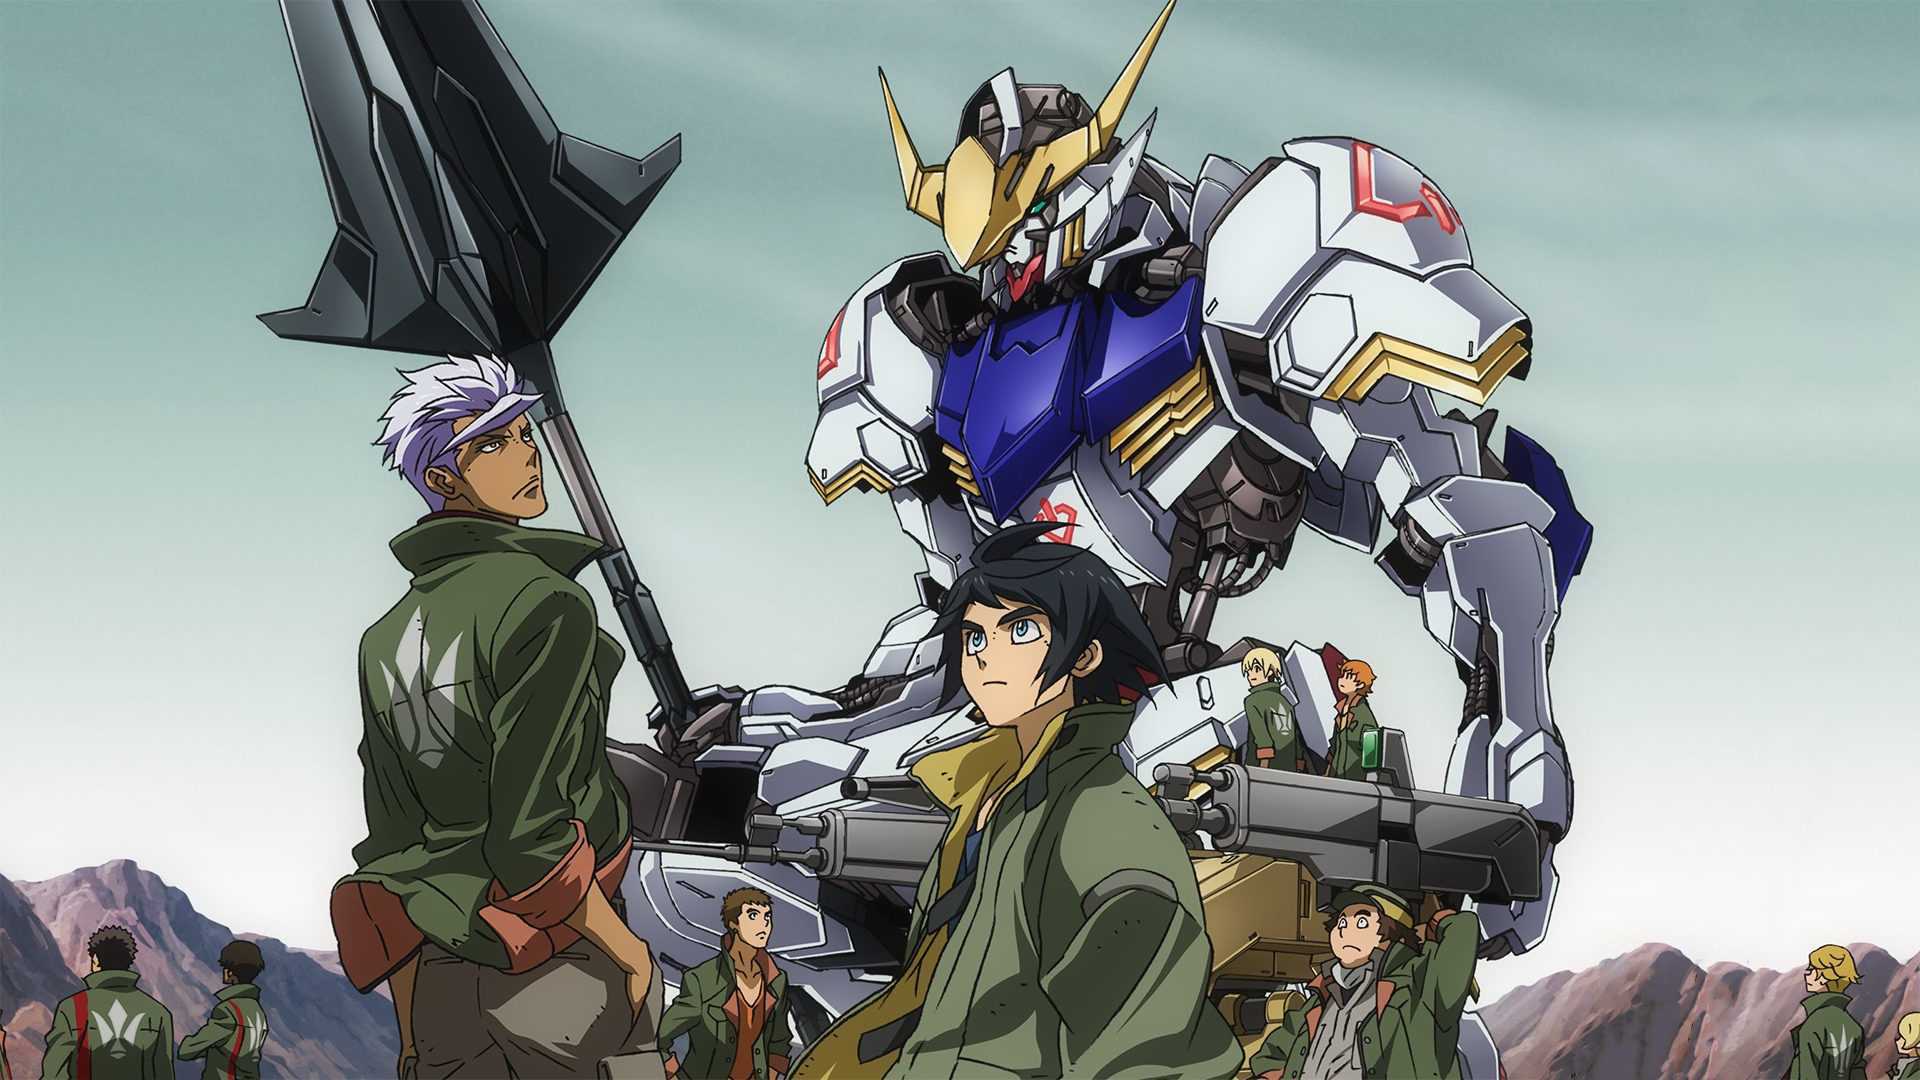 Anime Mobile Suit Gundam: Iron-Blooded Orphans HD Wallpaper by Exodor56